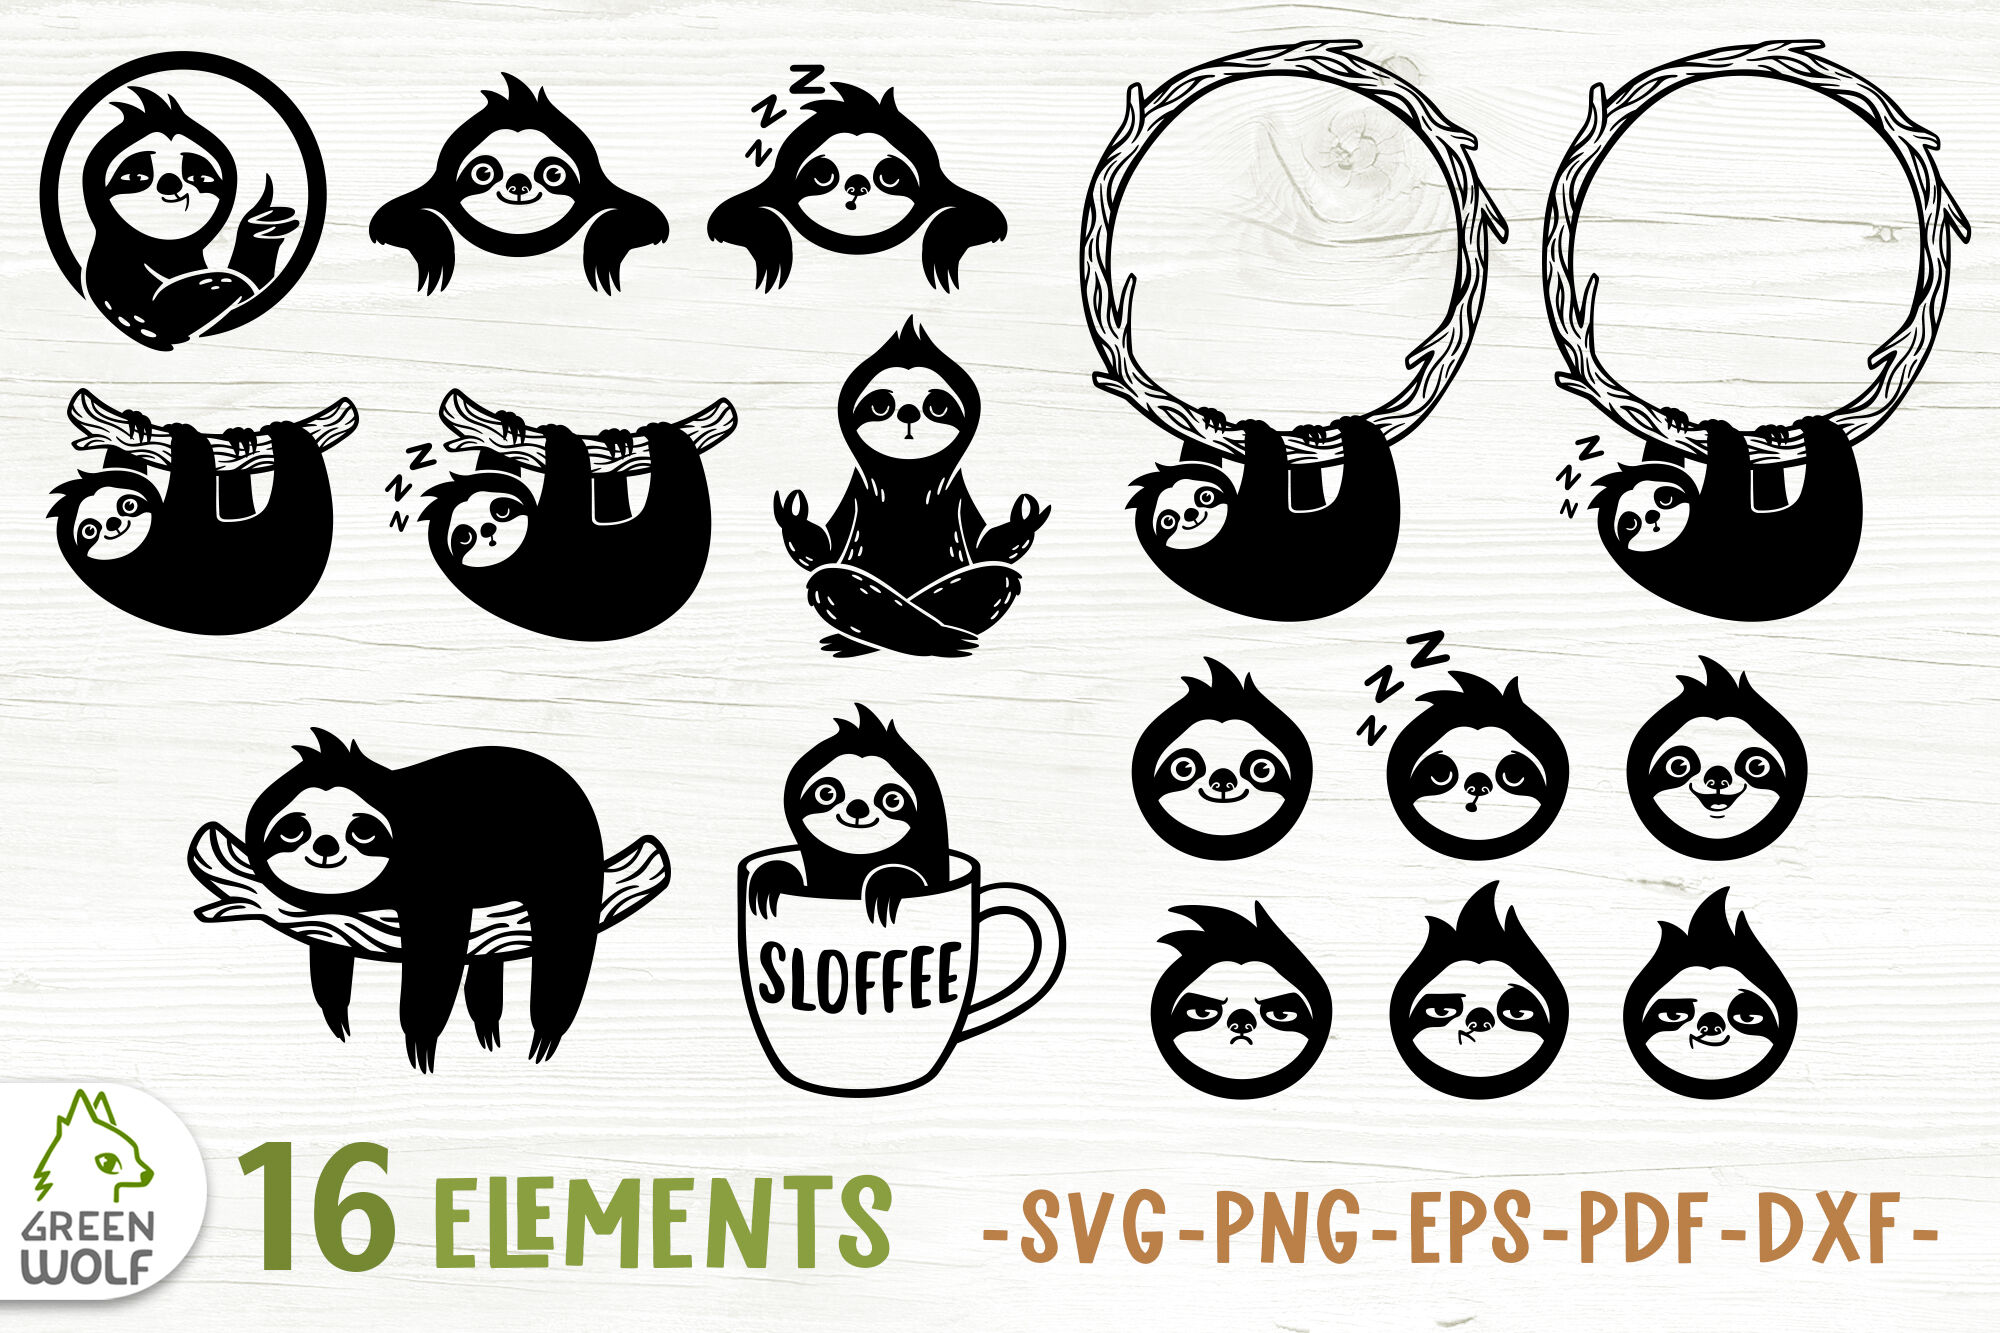 Sloth Svg Bundle Sloth Clipart Sloth Silhouette Svg Files For Cricut By Green Wolf Art